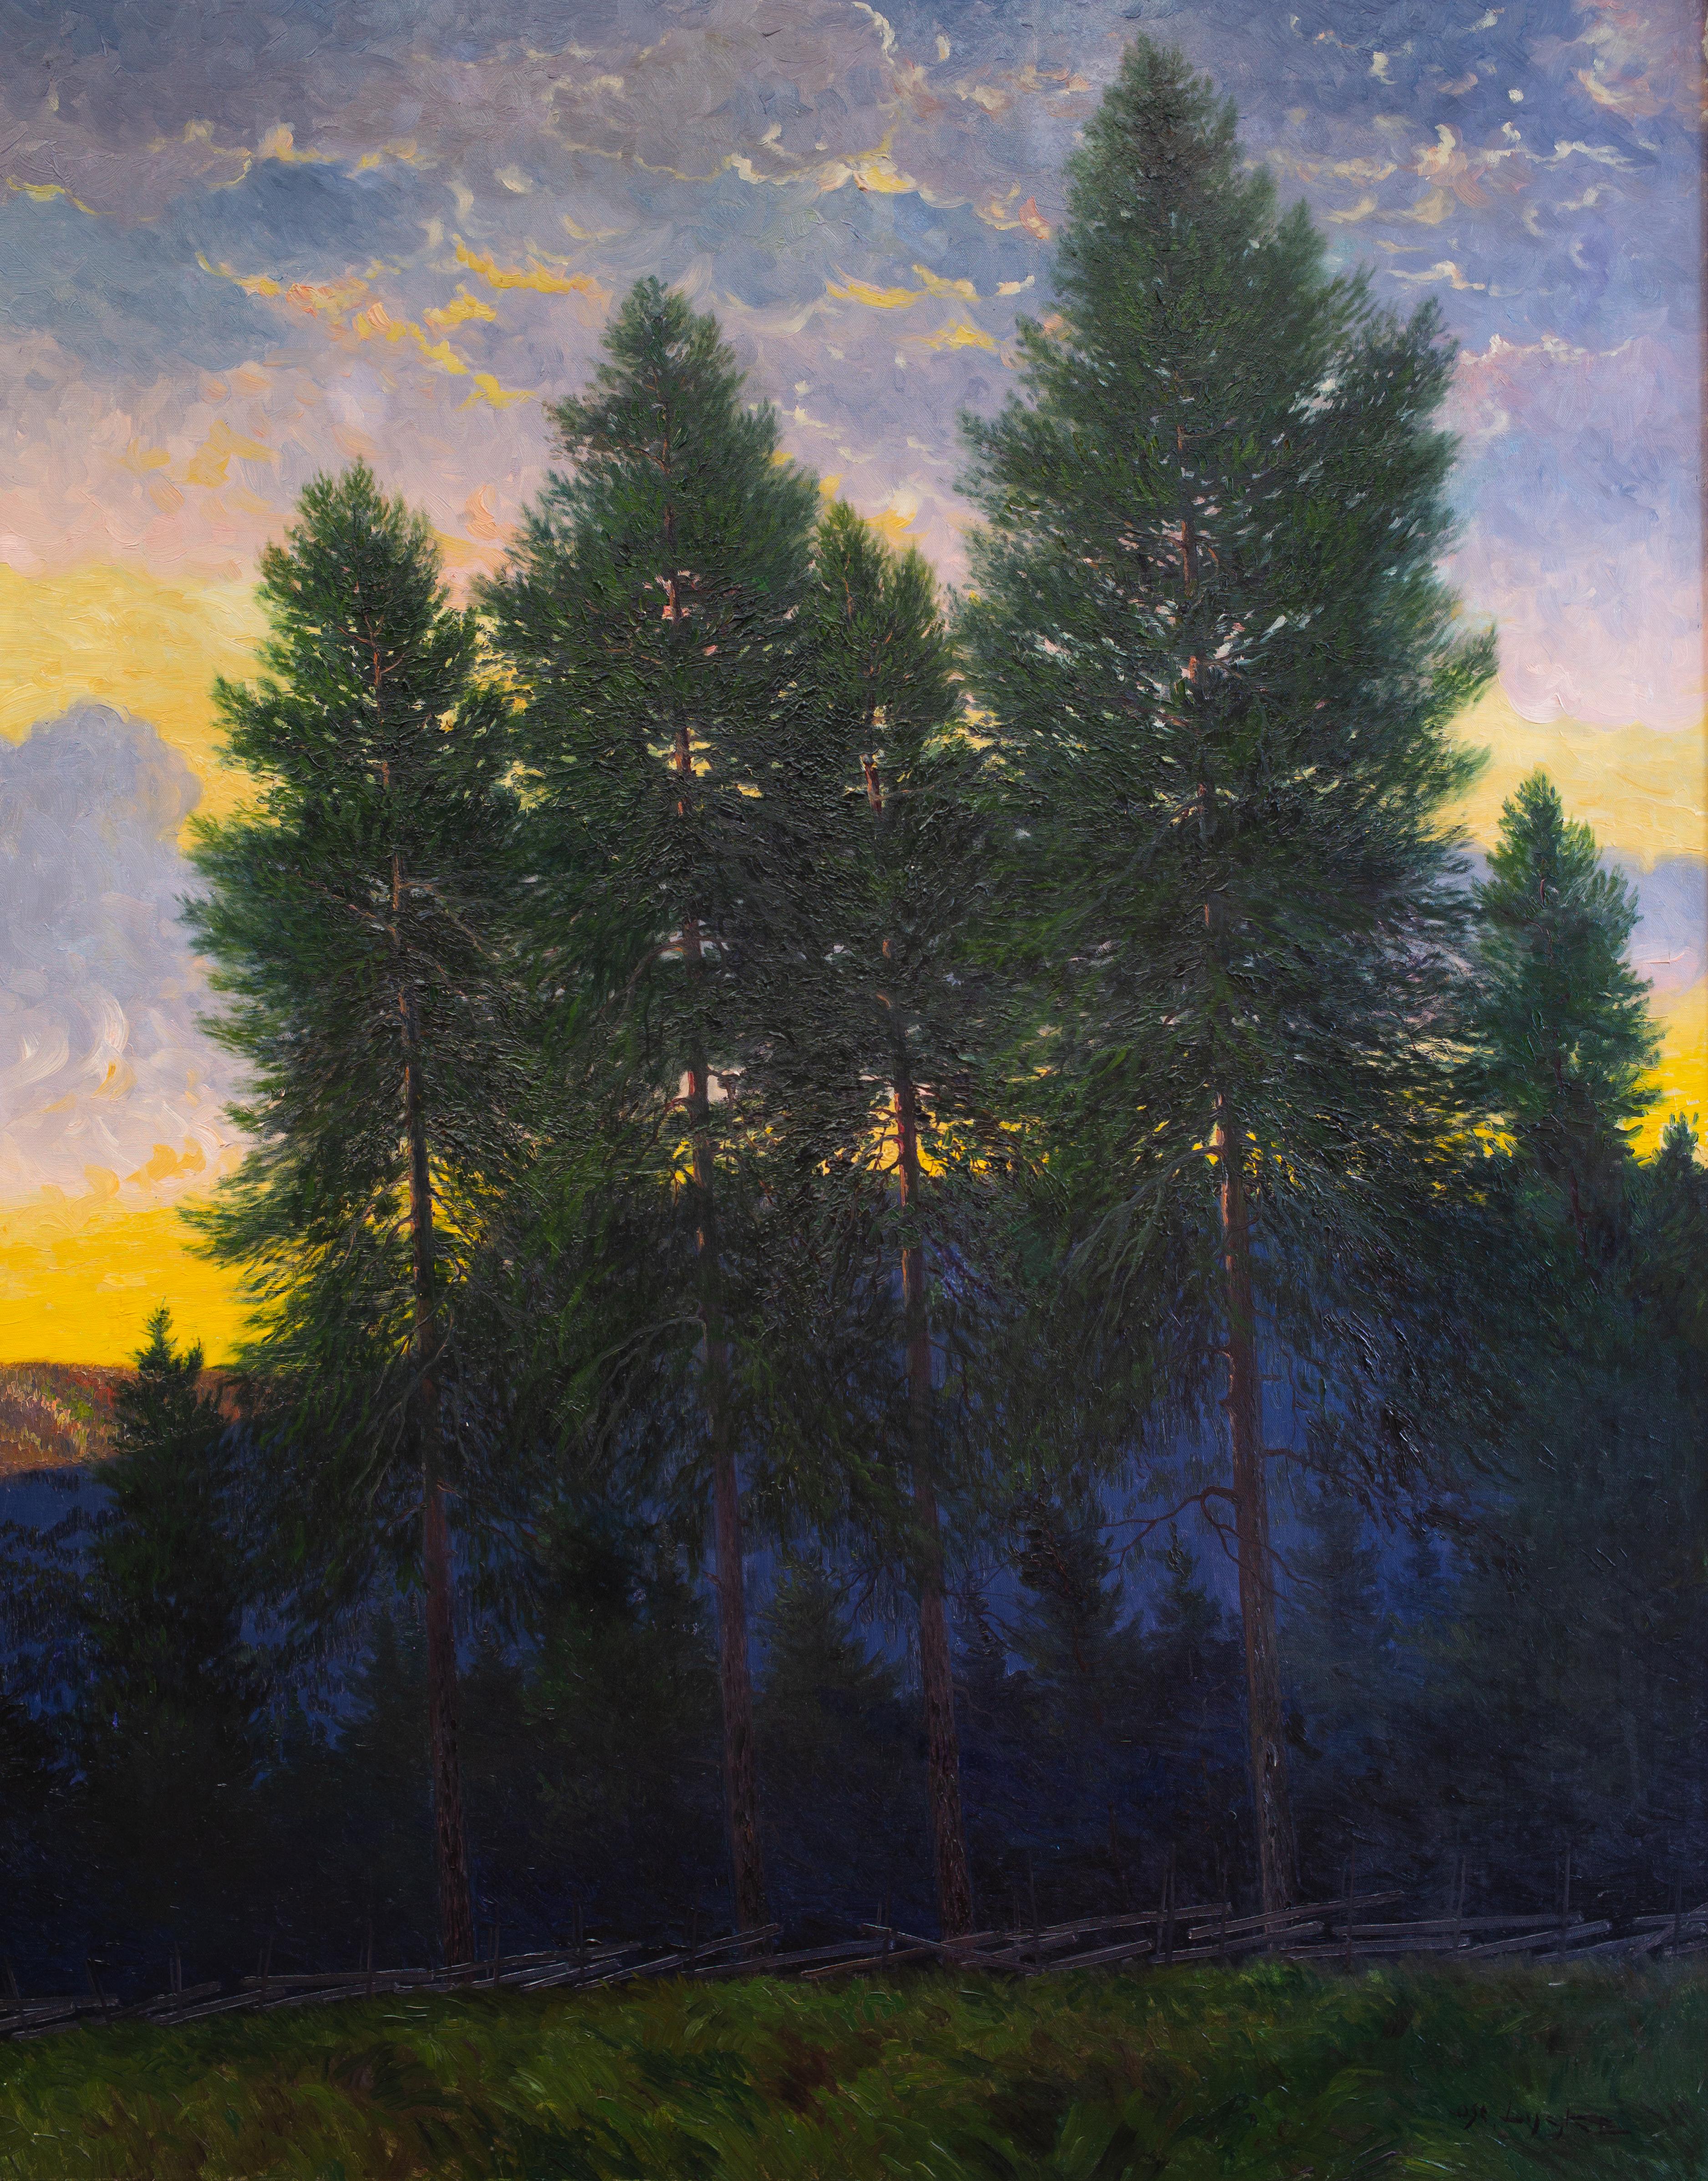 Large Landscape With Pines in Sunset - Motif From Liden by Oscar Lycke, Sweden